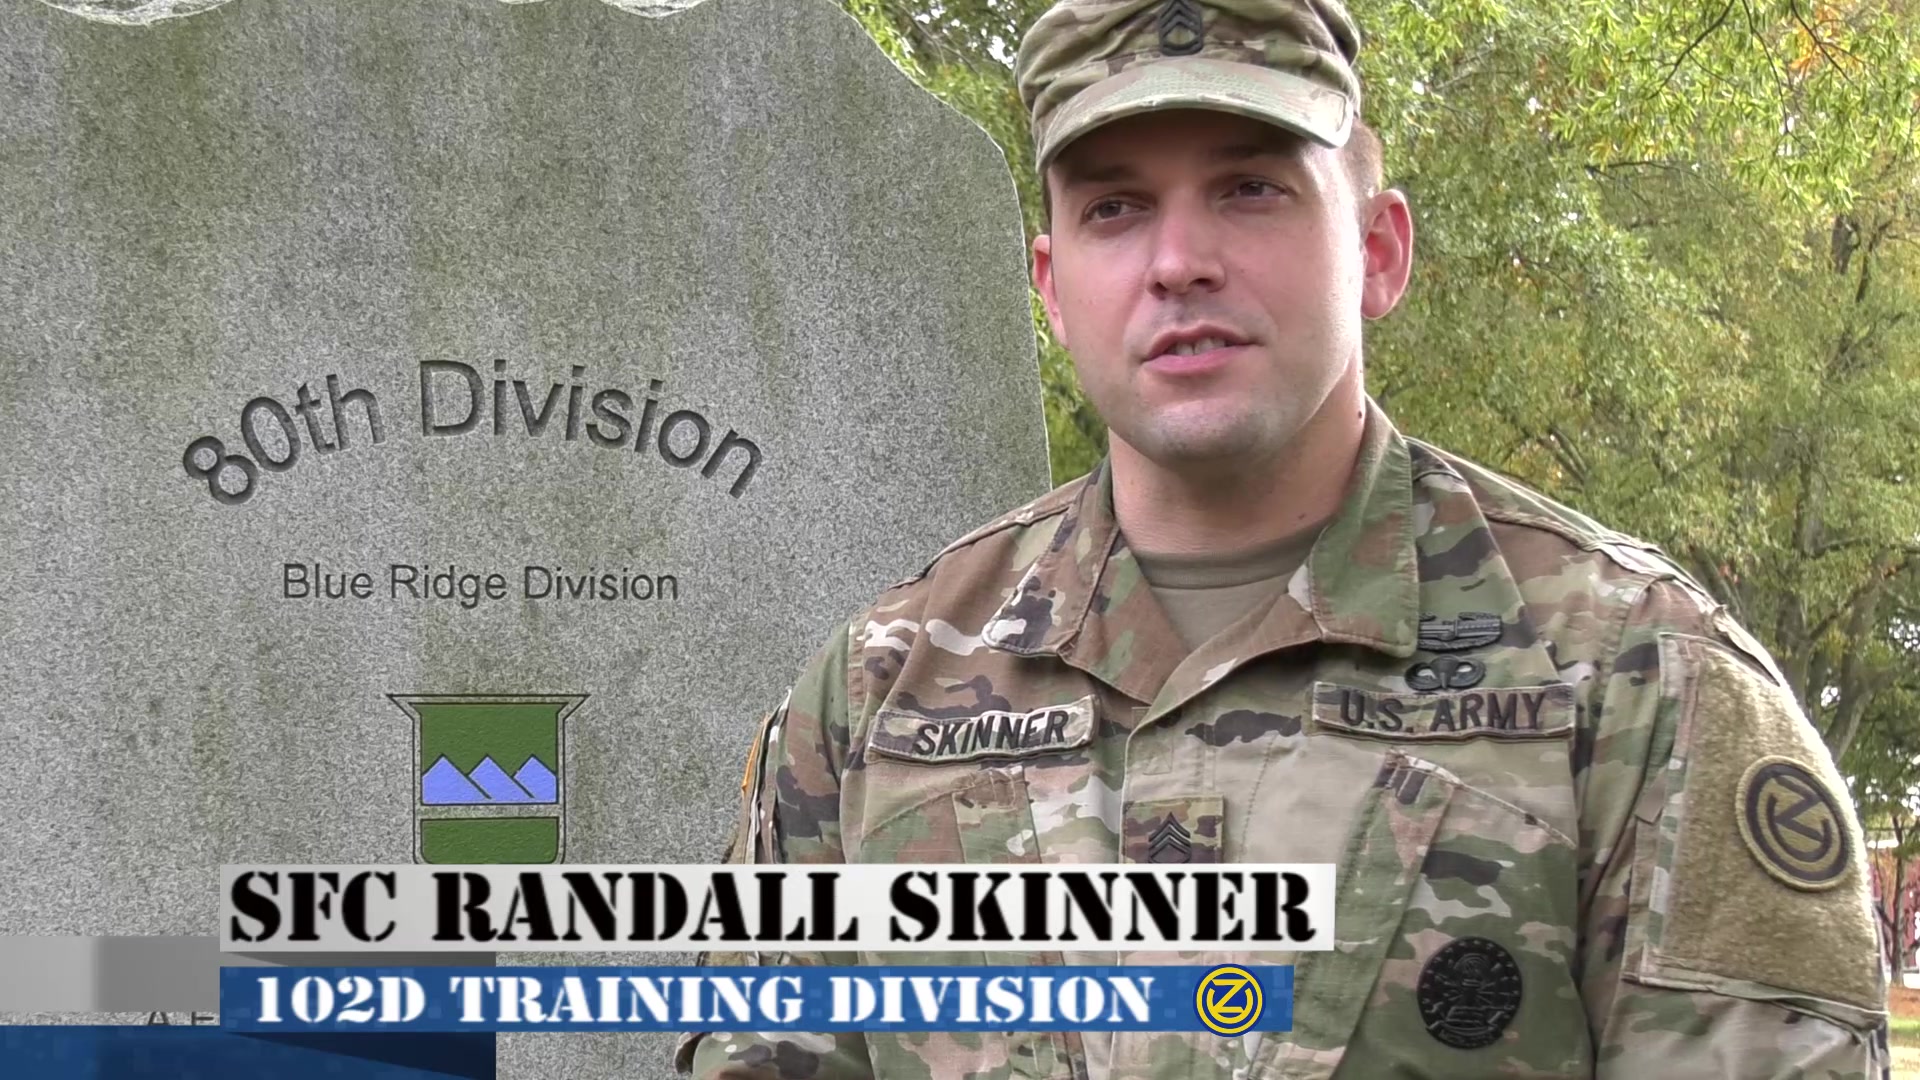 Seeing students apply knowledge. 
Here is why U.S. Army Reserve Sgt. 1st Class Randall Skinner, the 80th Training Command's 2020 NCO Instructor of the Year, instructs. 
Join our instructor team! 
For info on available opportunities, contact your local career counselor or the 80th's counselor at 910-656-0907.